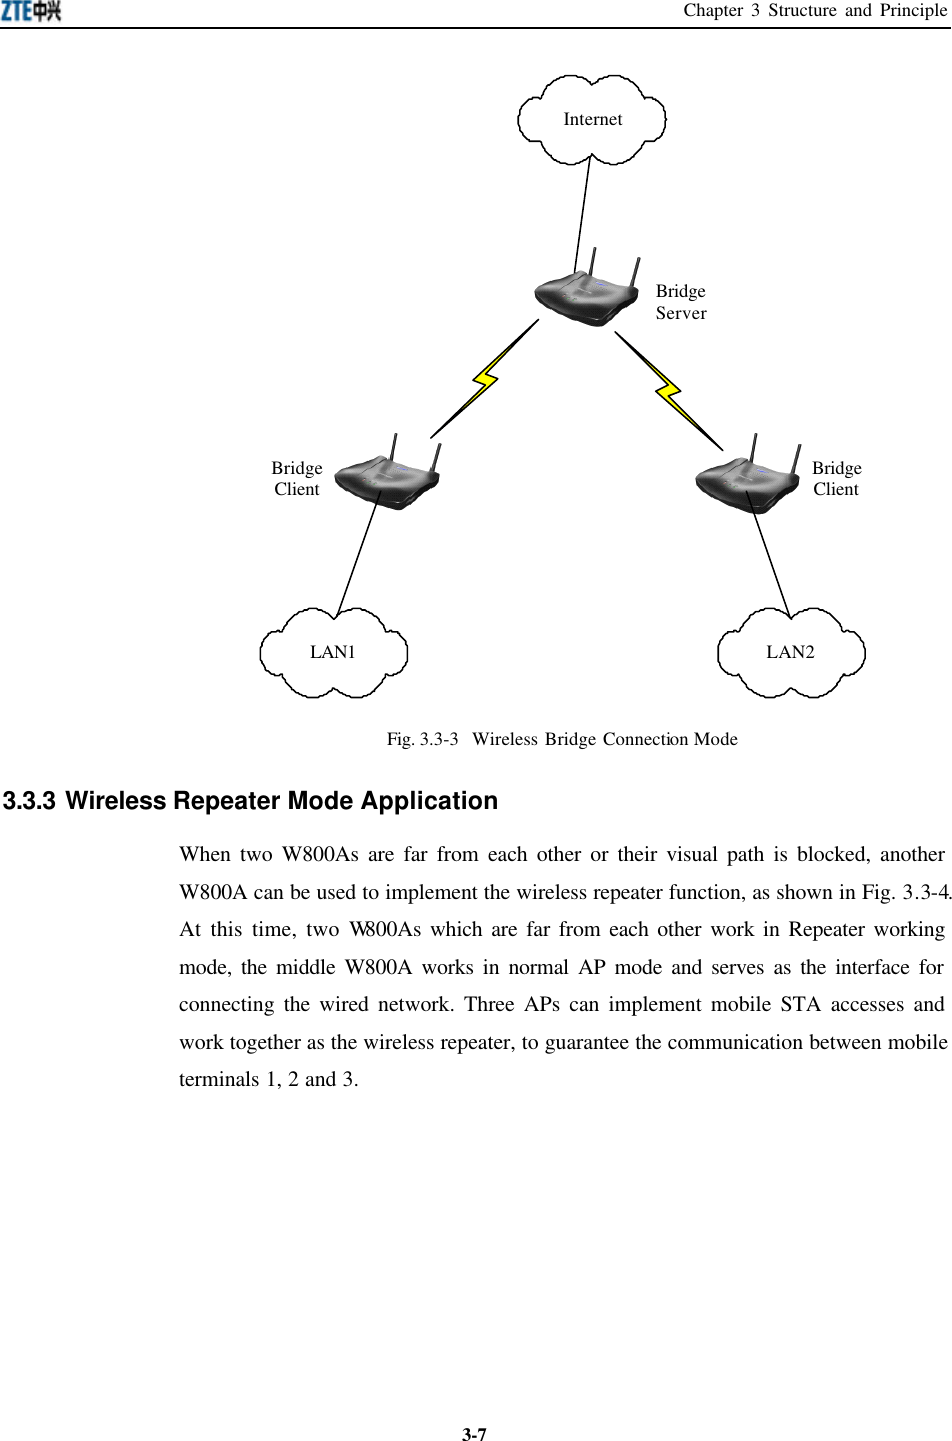 Chapter 3 Structure and Principle  3-7BridgeClient BridgeClientLAN1 LAN2InternetBridgeServer Fig. 3.3-3  Wireless Bridge Connection Mode 3.3.3 Wireless Repeater Mode Application   When two W800As are far from each other or their visual path is blocked, another W800A can be used to implement the wireless repeater function, as shown in Fig. 3.3-4. At this time, two W800As which are far from each other work in Repeater working mode, the middle W800A works in normal AP mode and serves as the interface for connecting the wired network. Three APs can implement mobile STA accesses and work together as the wireless repeater, to guarantee the communication between mobile terminals 1, 2 and 3.   